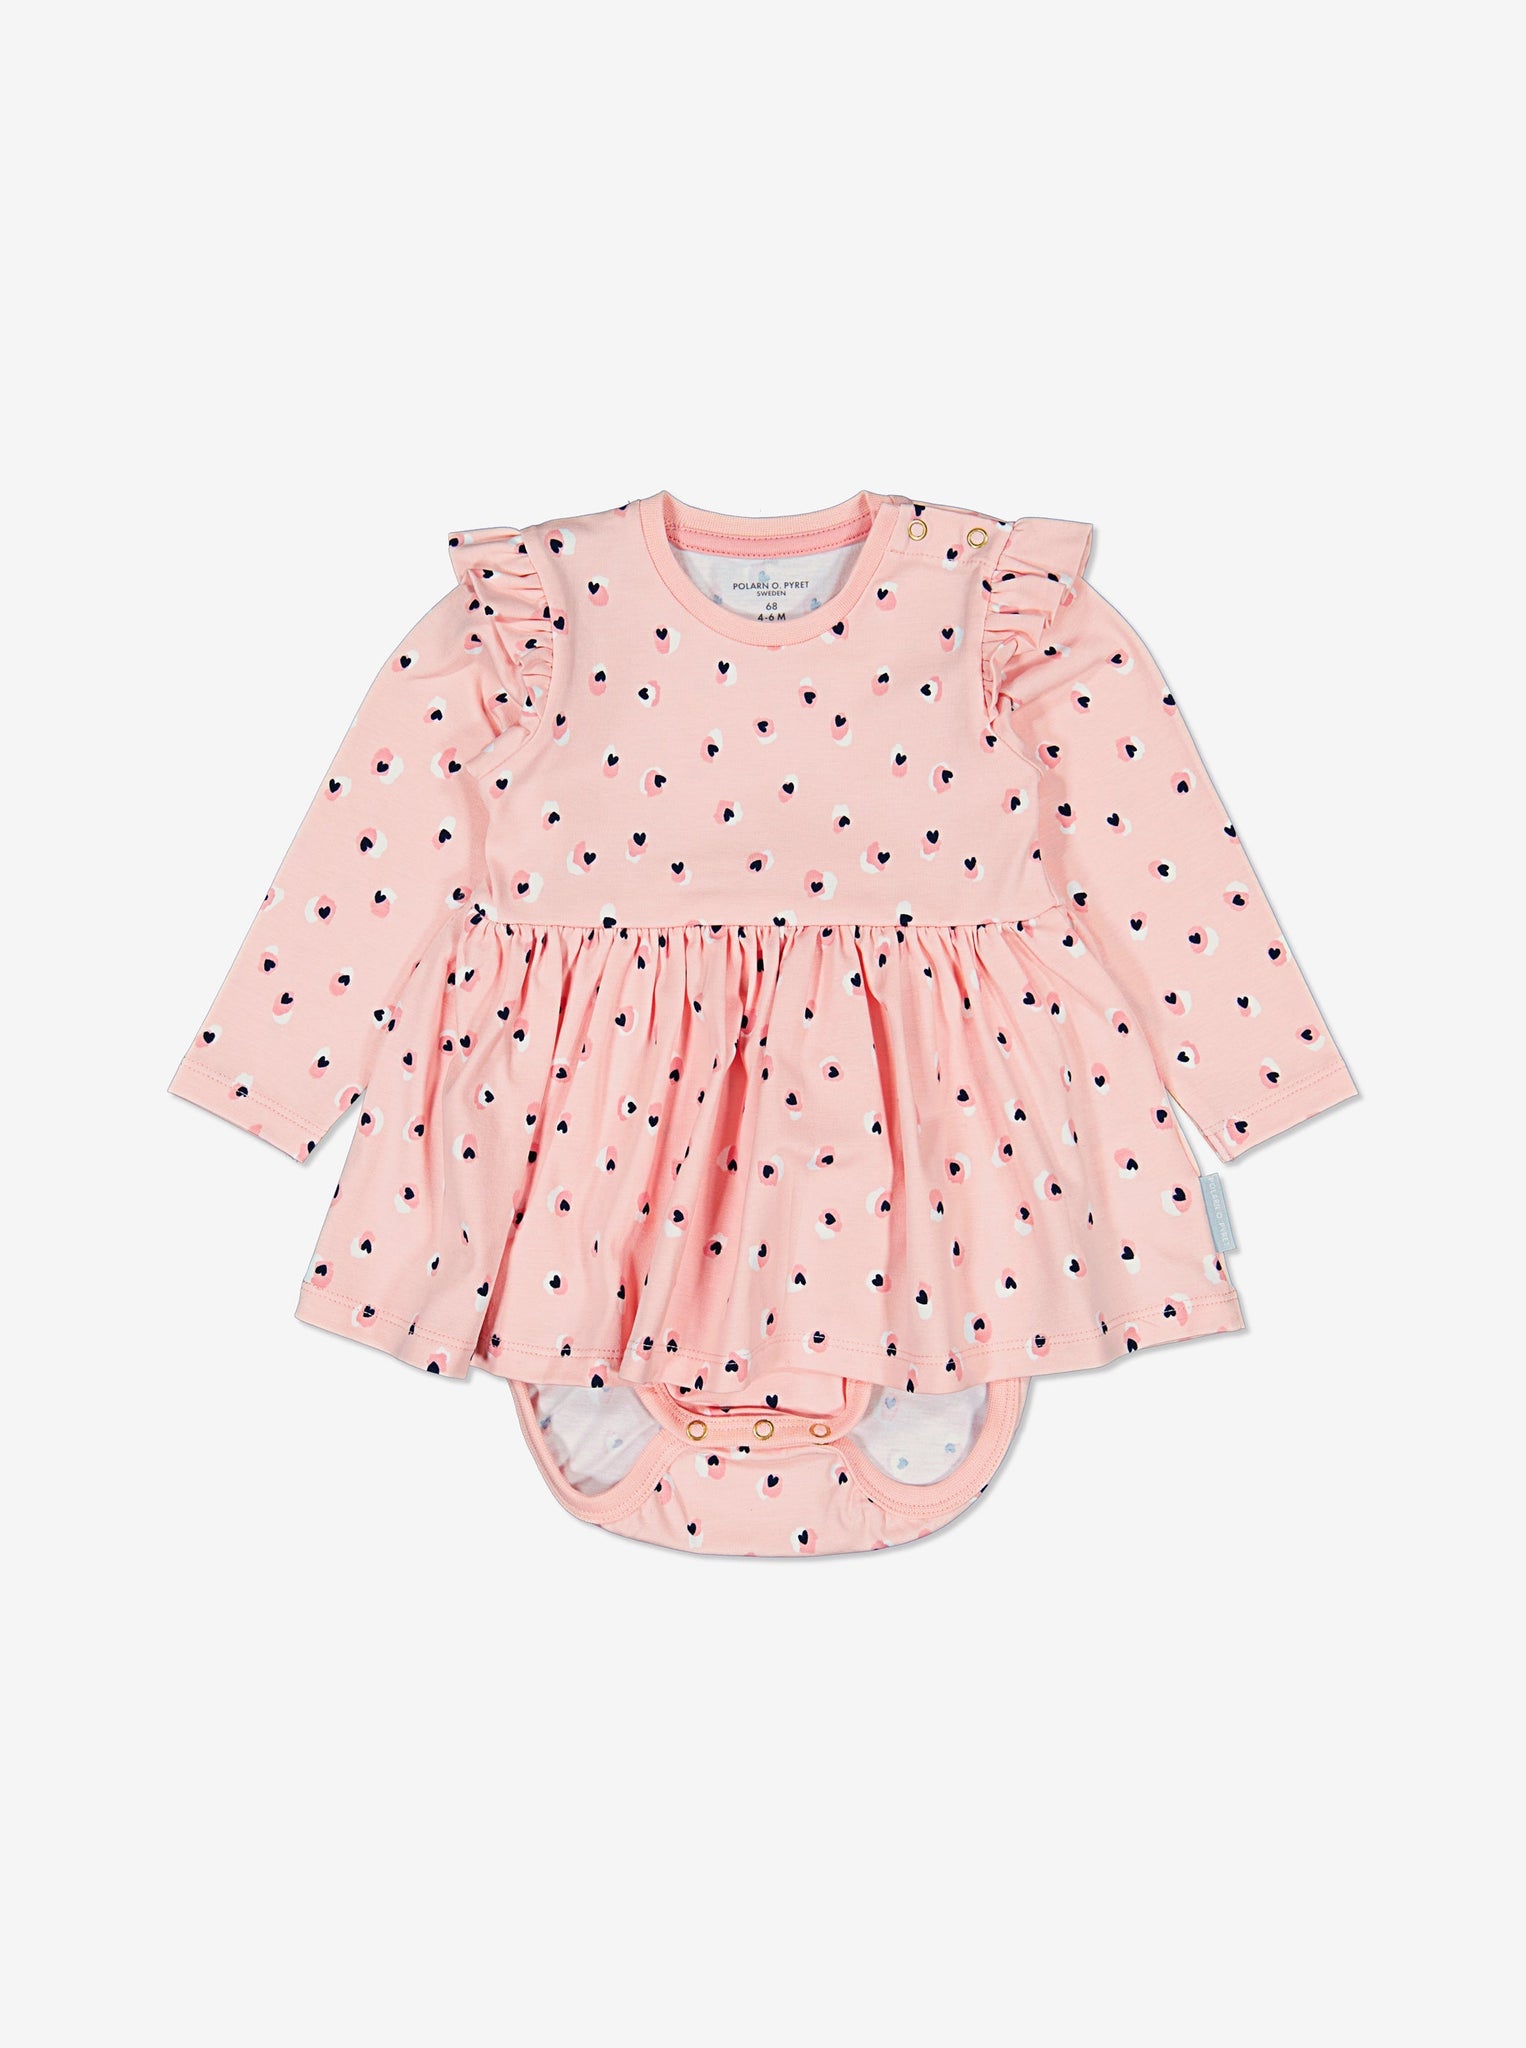  Pink Floral Baby Bodysuit & Dress from Polarn O. Pyret Kidswear. Made using sustainable materials.